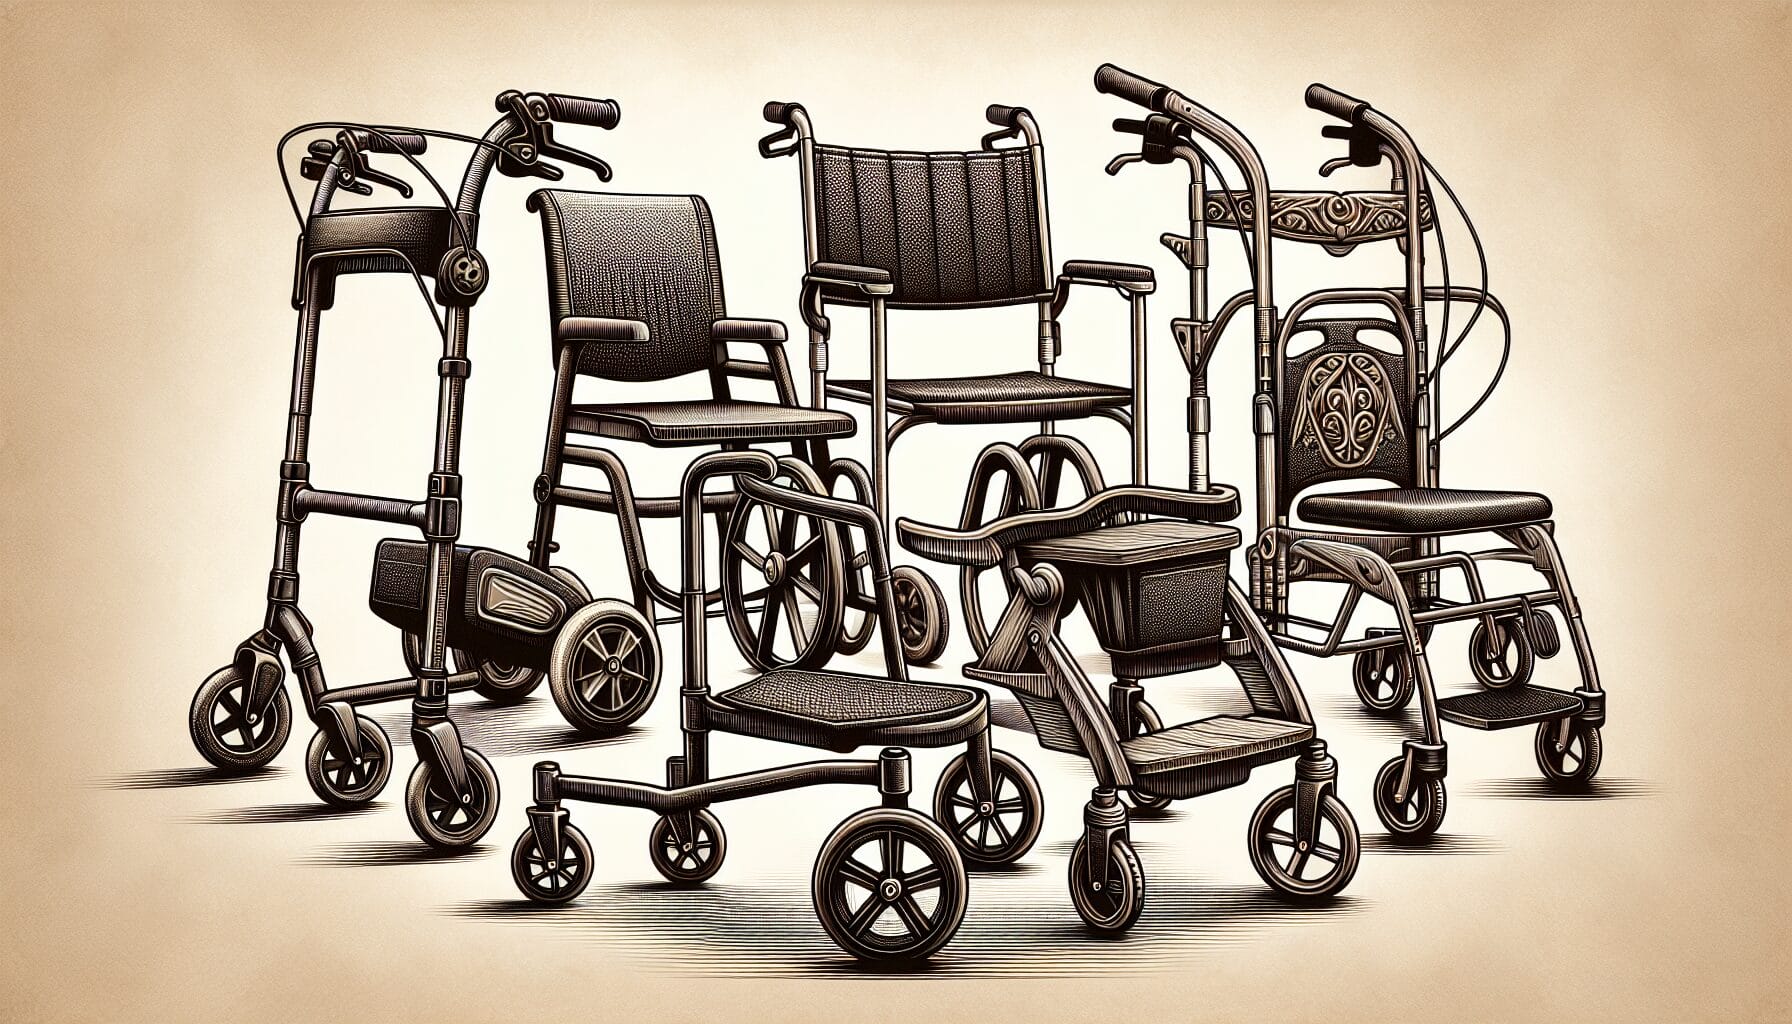 Illustration of different types of rollators including three-wheeled, four-wheeled, heavy-duty, and foldable models